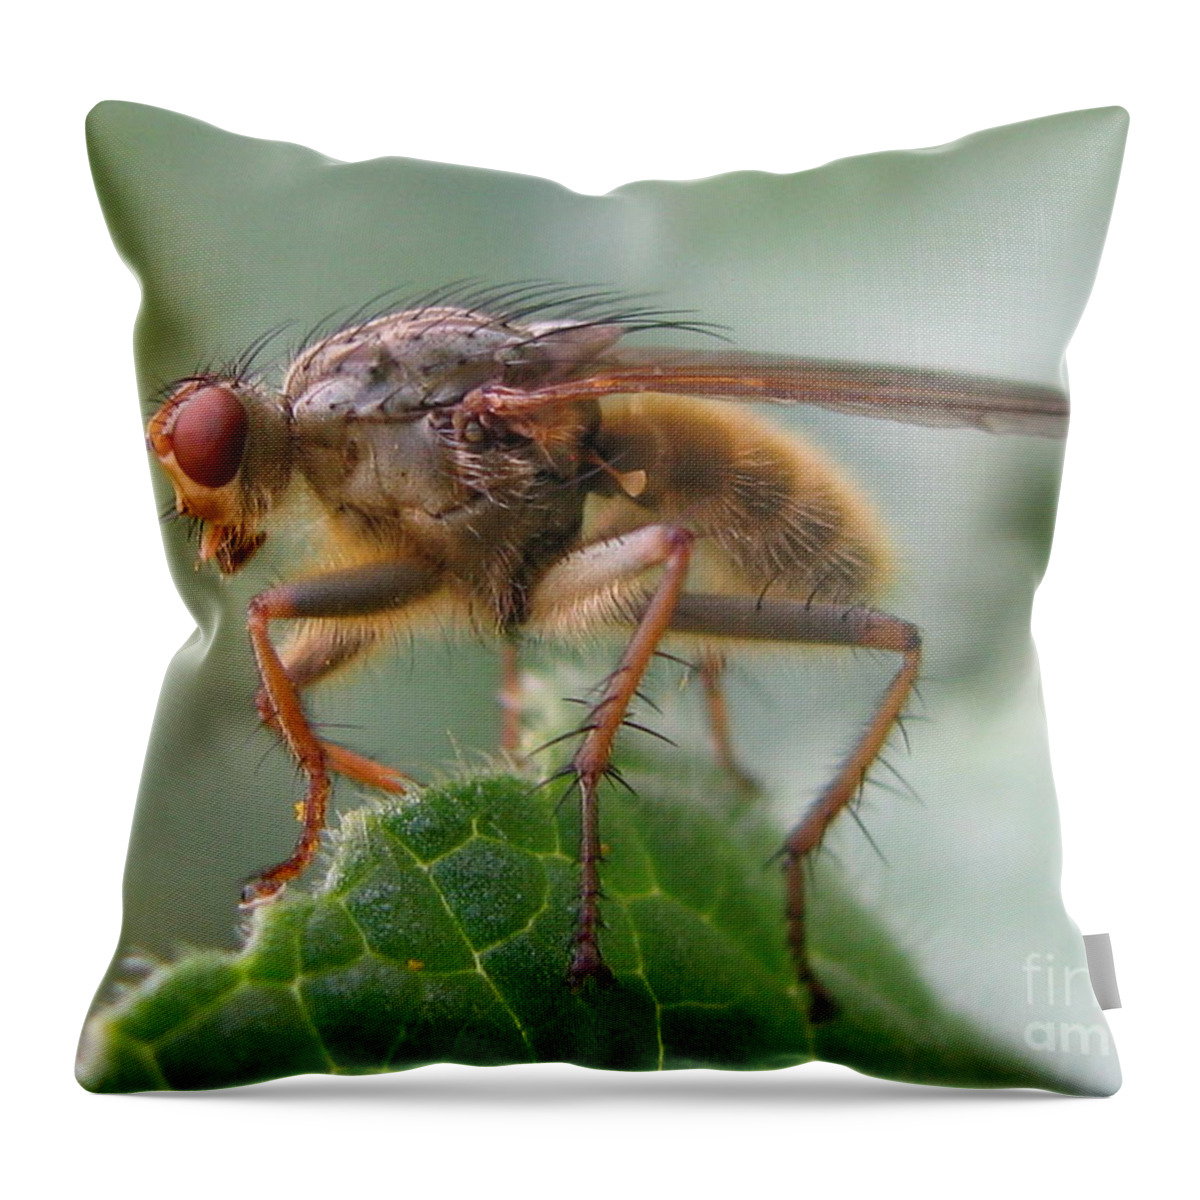 Flower Throw Pillow featuring the photograph Meditating by Tina Marie